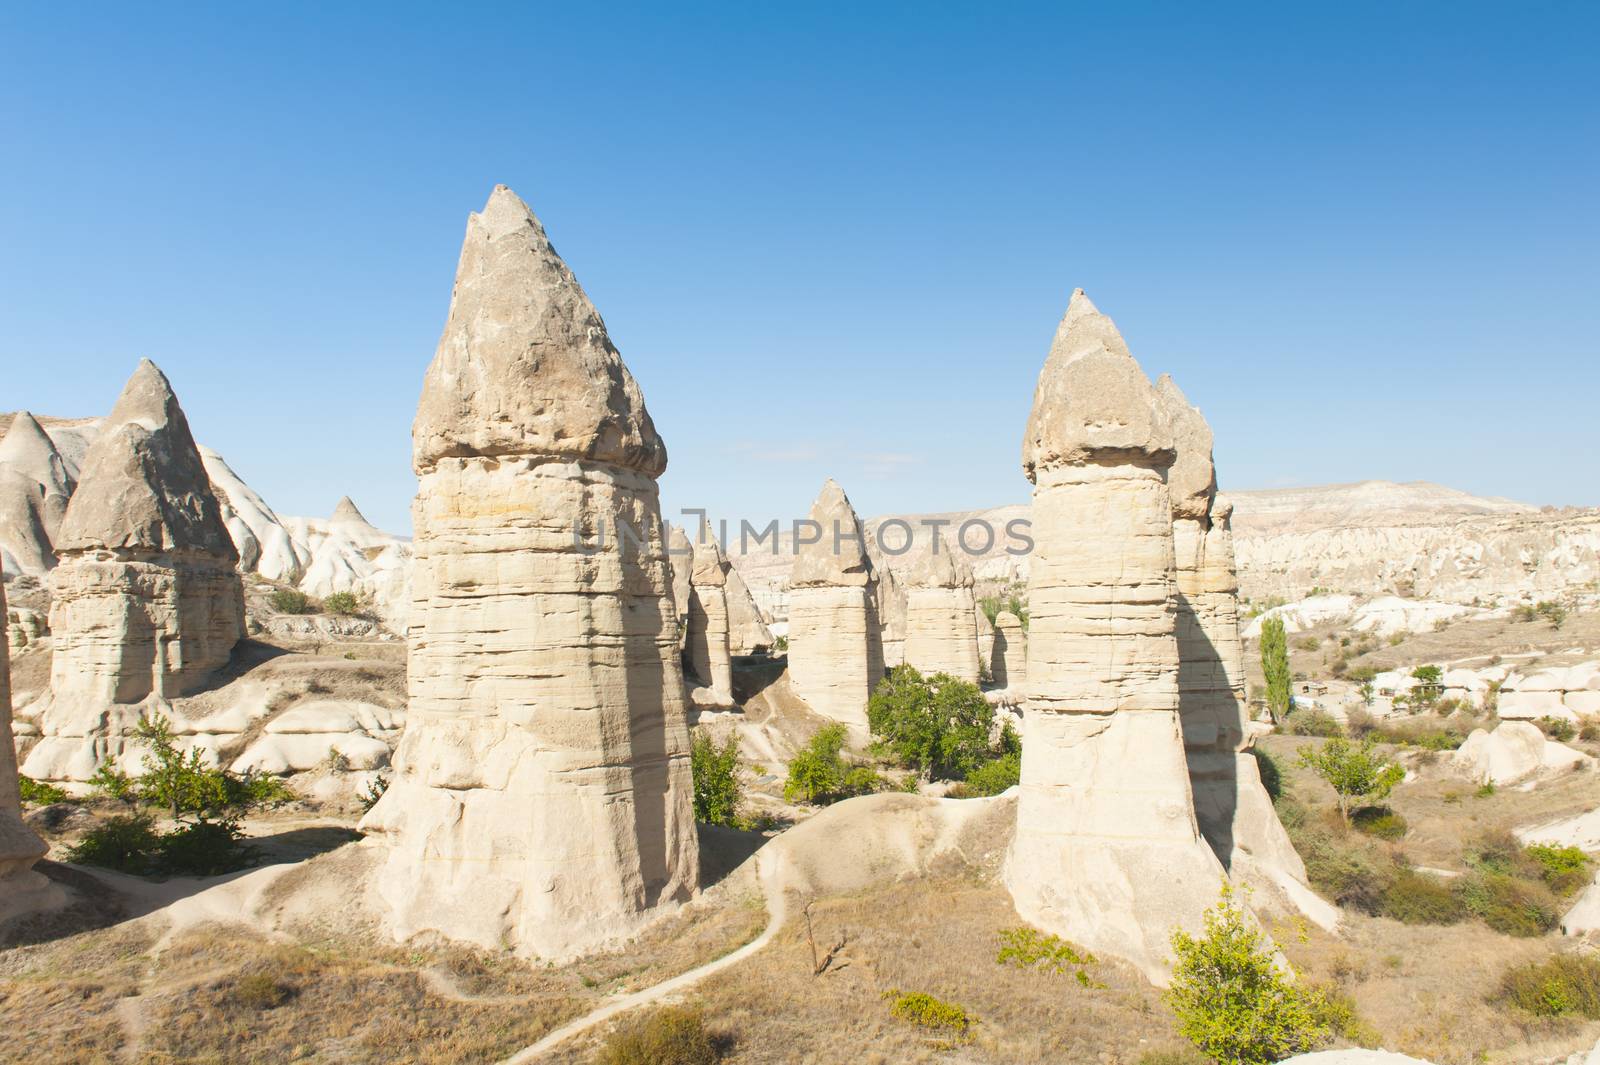 Fairy tale chimneys by fyletto